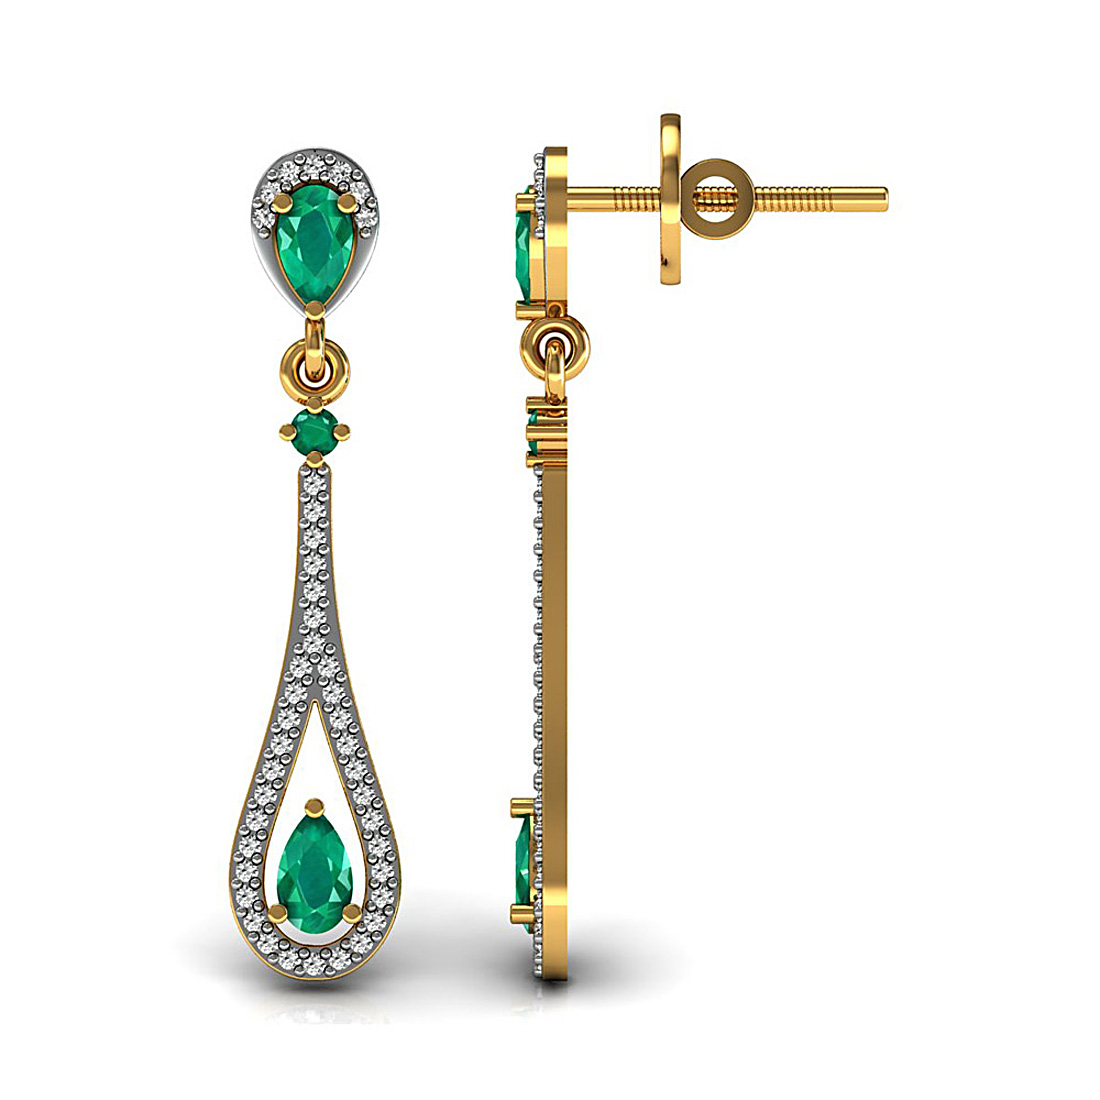 18K Solid yellow gold drop style dangle earrings studded with natural emerald gemstone and genuine diamond.